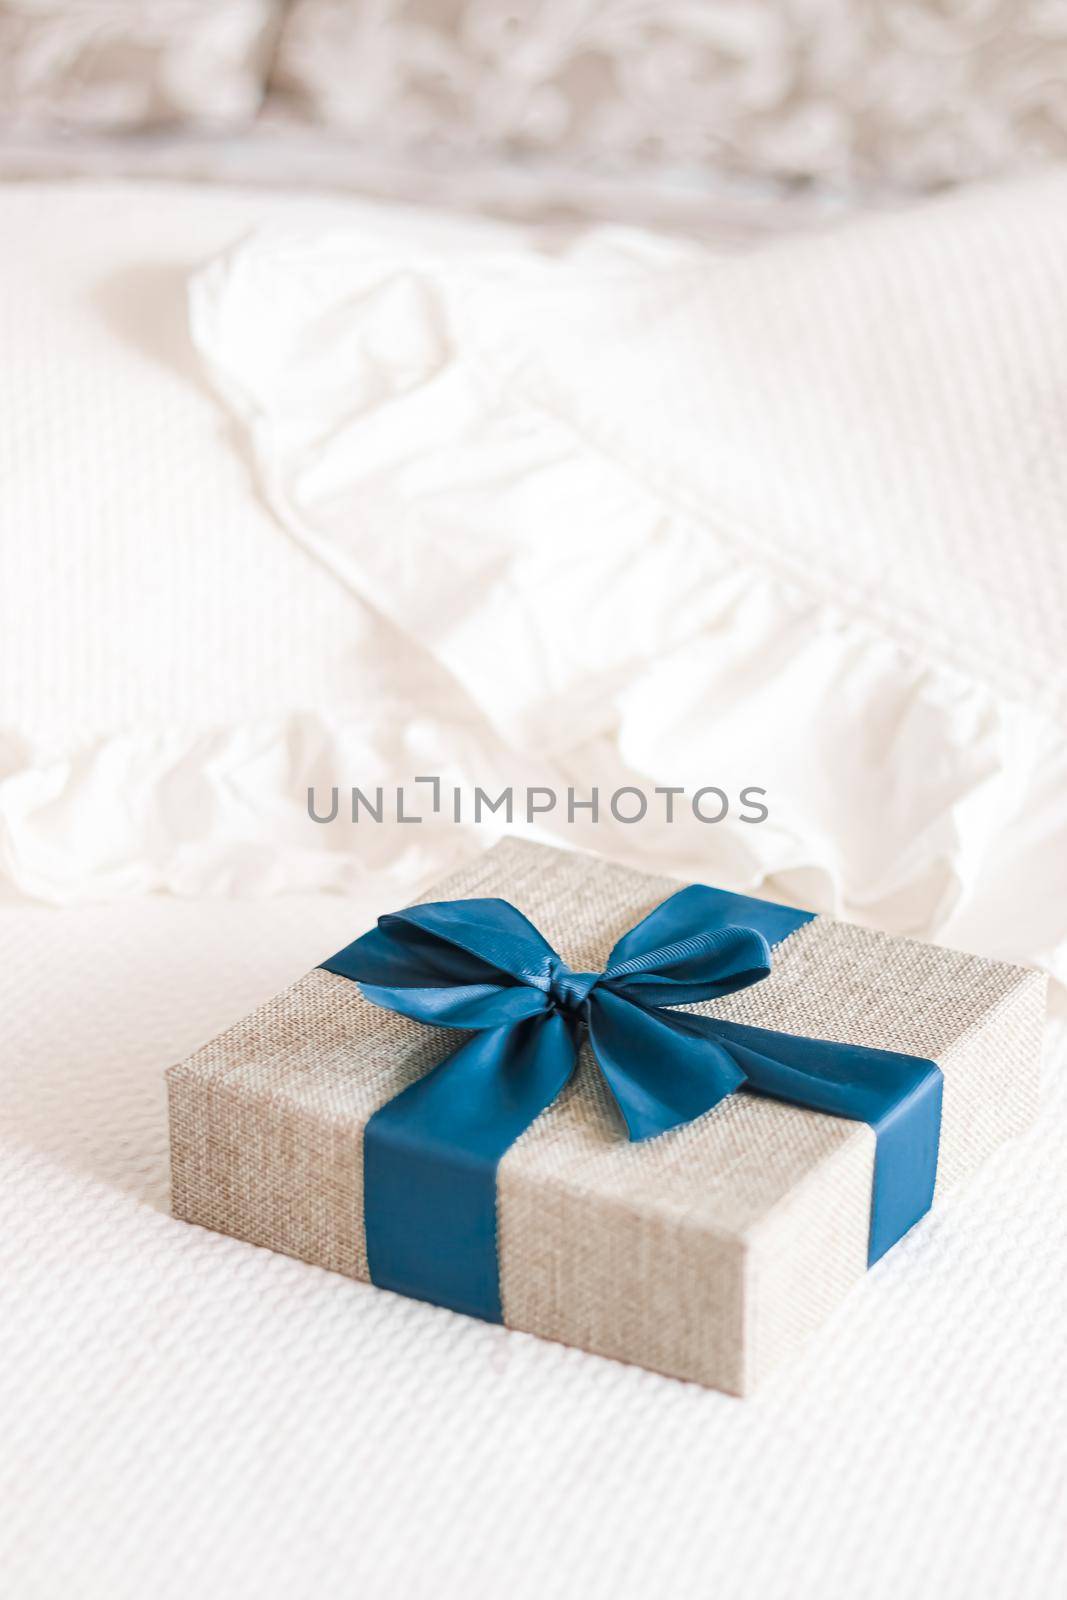 Holiday present and luxury online shopping delivery, wrapped linen gift box with blue ribbon on bed in bedroom, chic countryside style by Anneleven